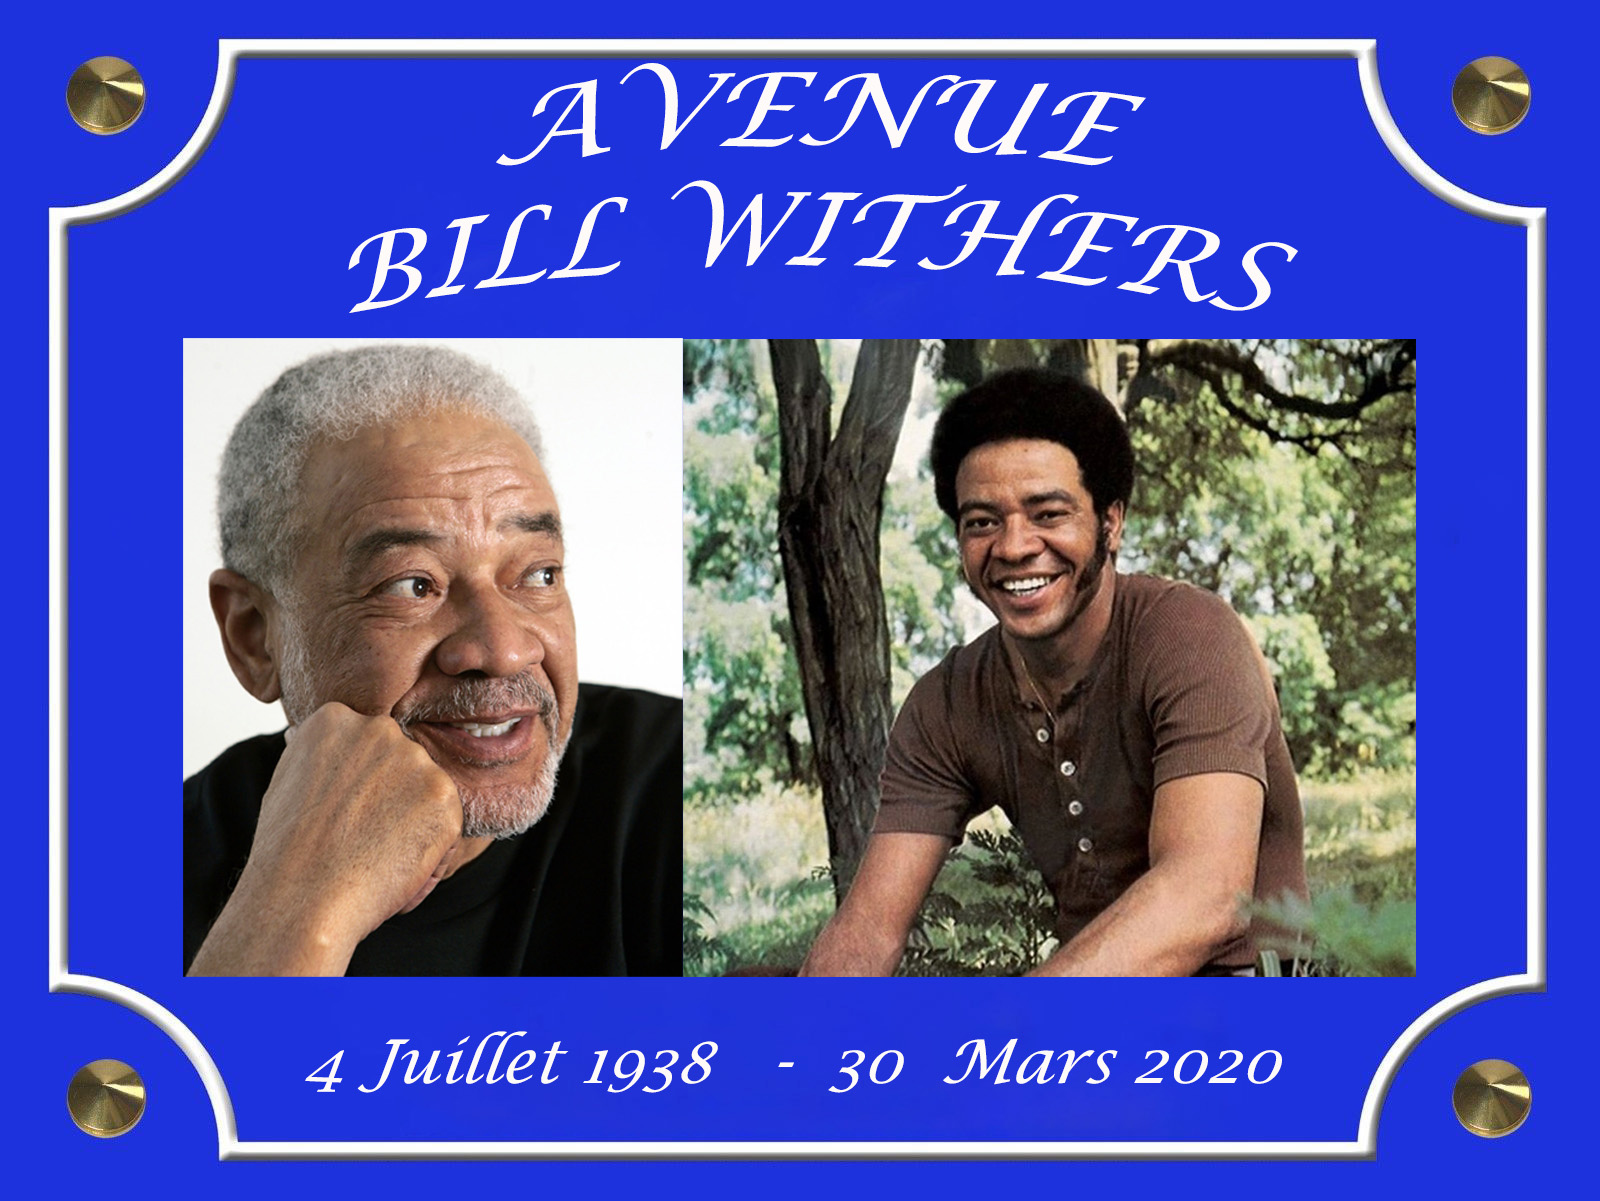 Avennue Bill Withers